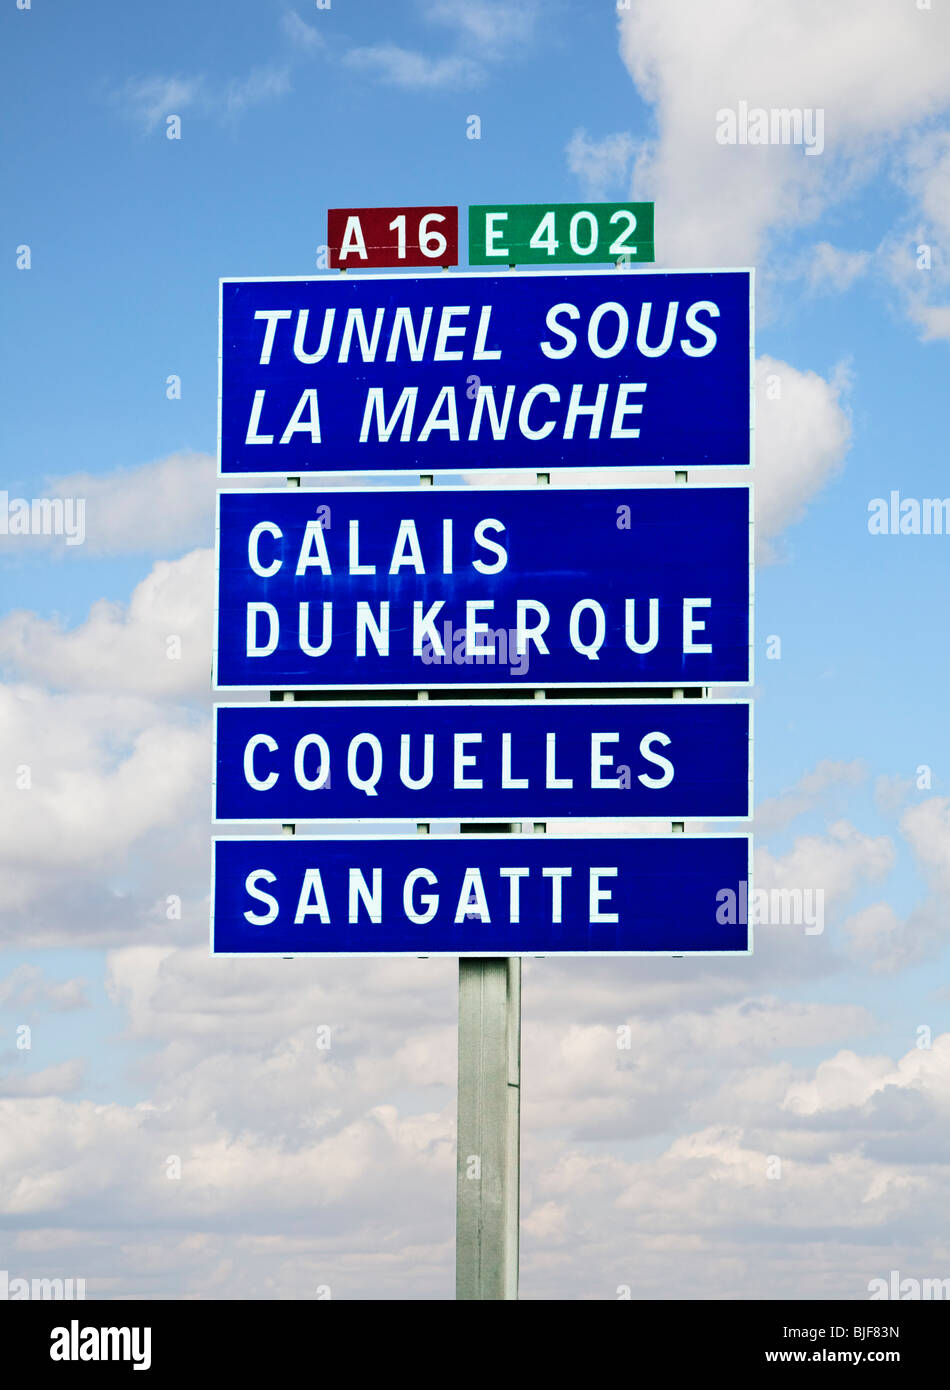 French autoroute traffic sign to the Channel Tunnel and Calais ferry port, France, Europe Stock Photo